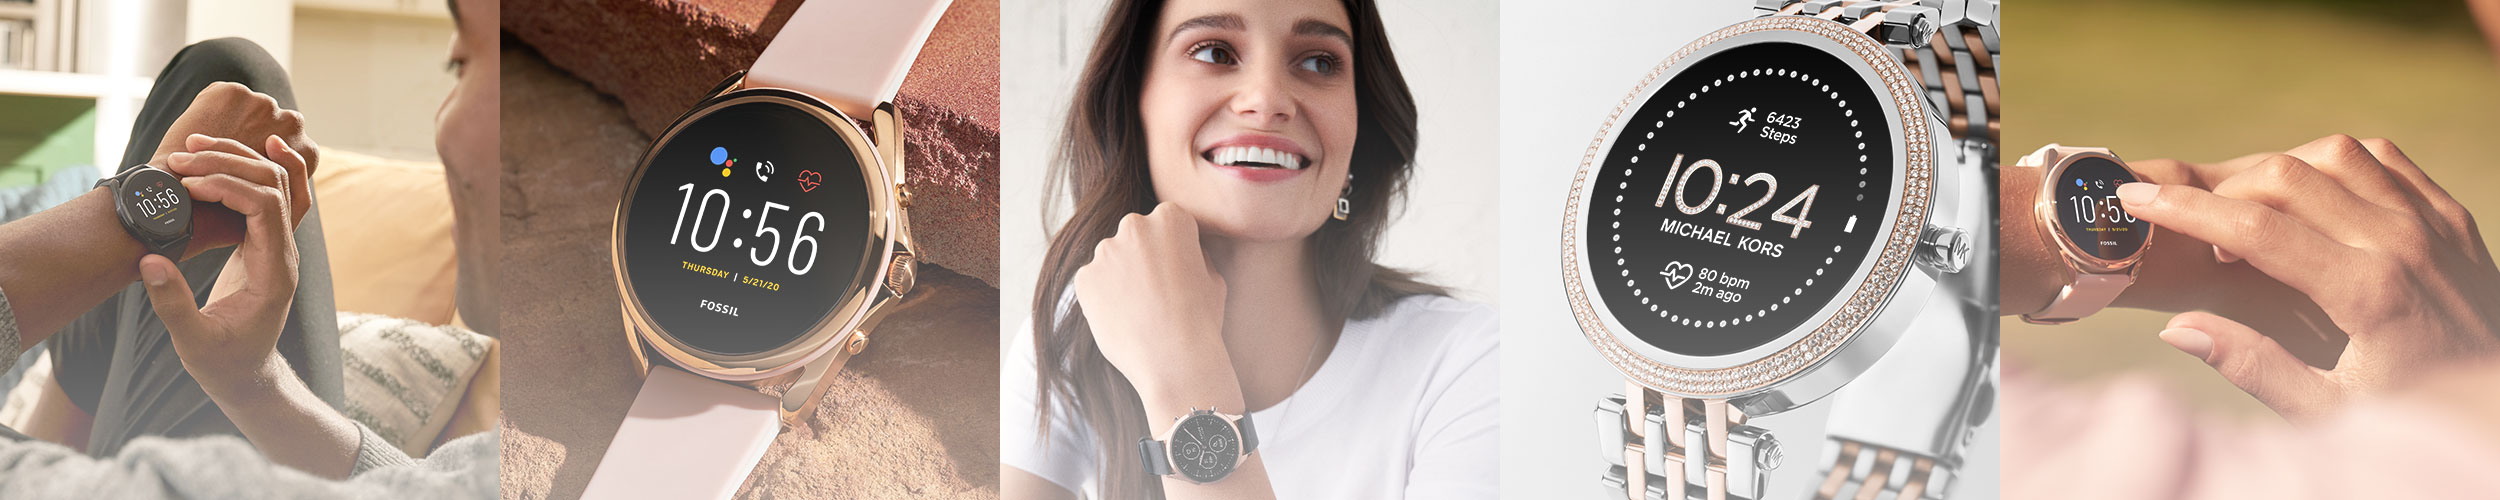 Fossil, Skagen and Michael Kors Launch LTE smartwatches at CES 2021